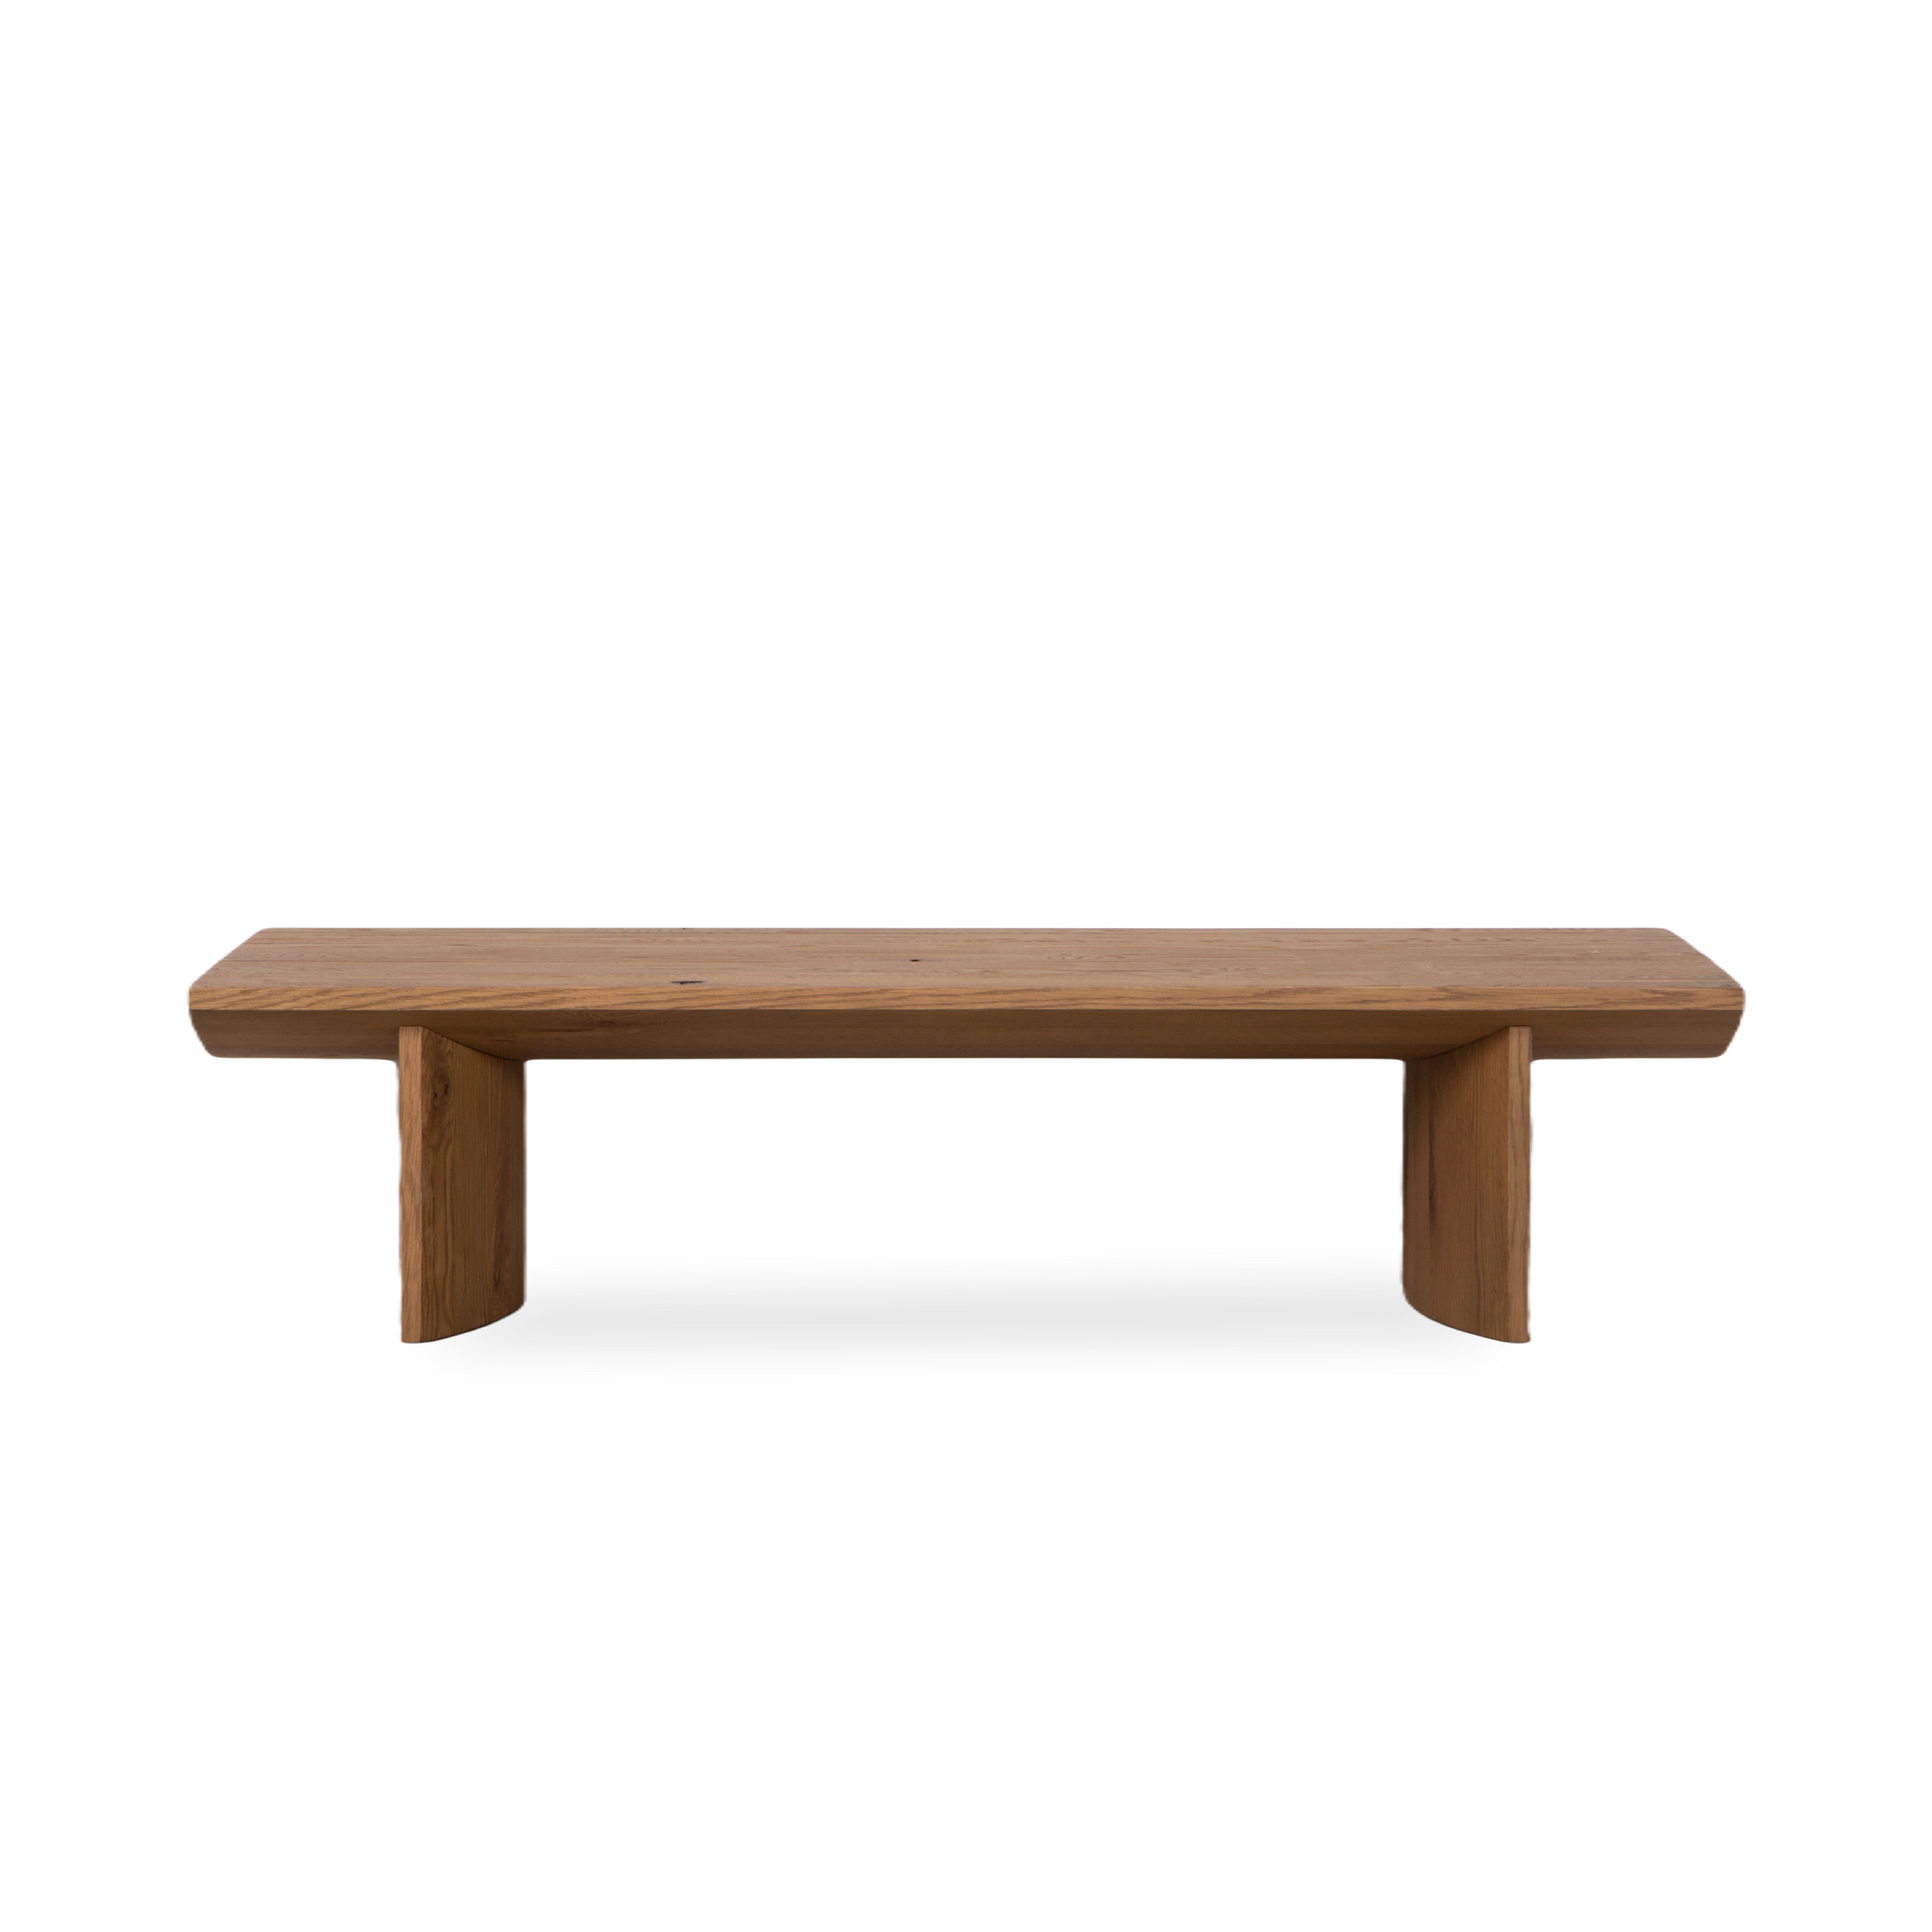 Showcasing a simple elegance, the Crescent Coffee Table is all about displaying the beauty of Oak wood.